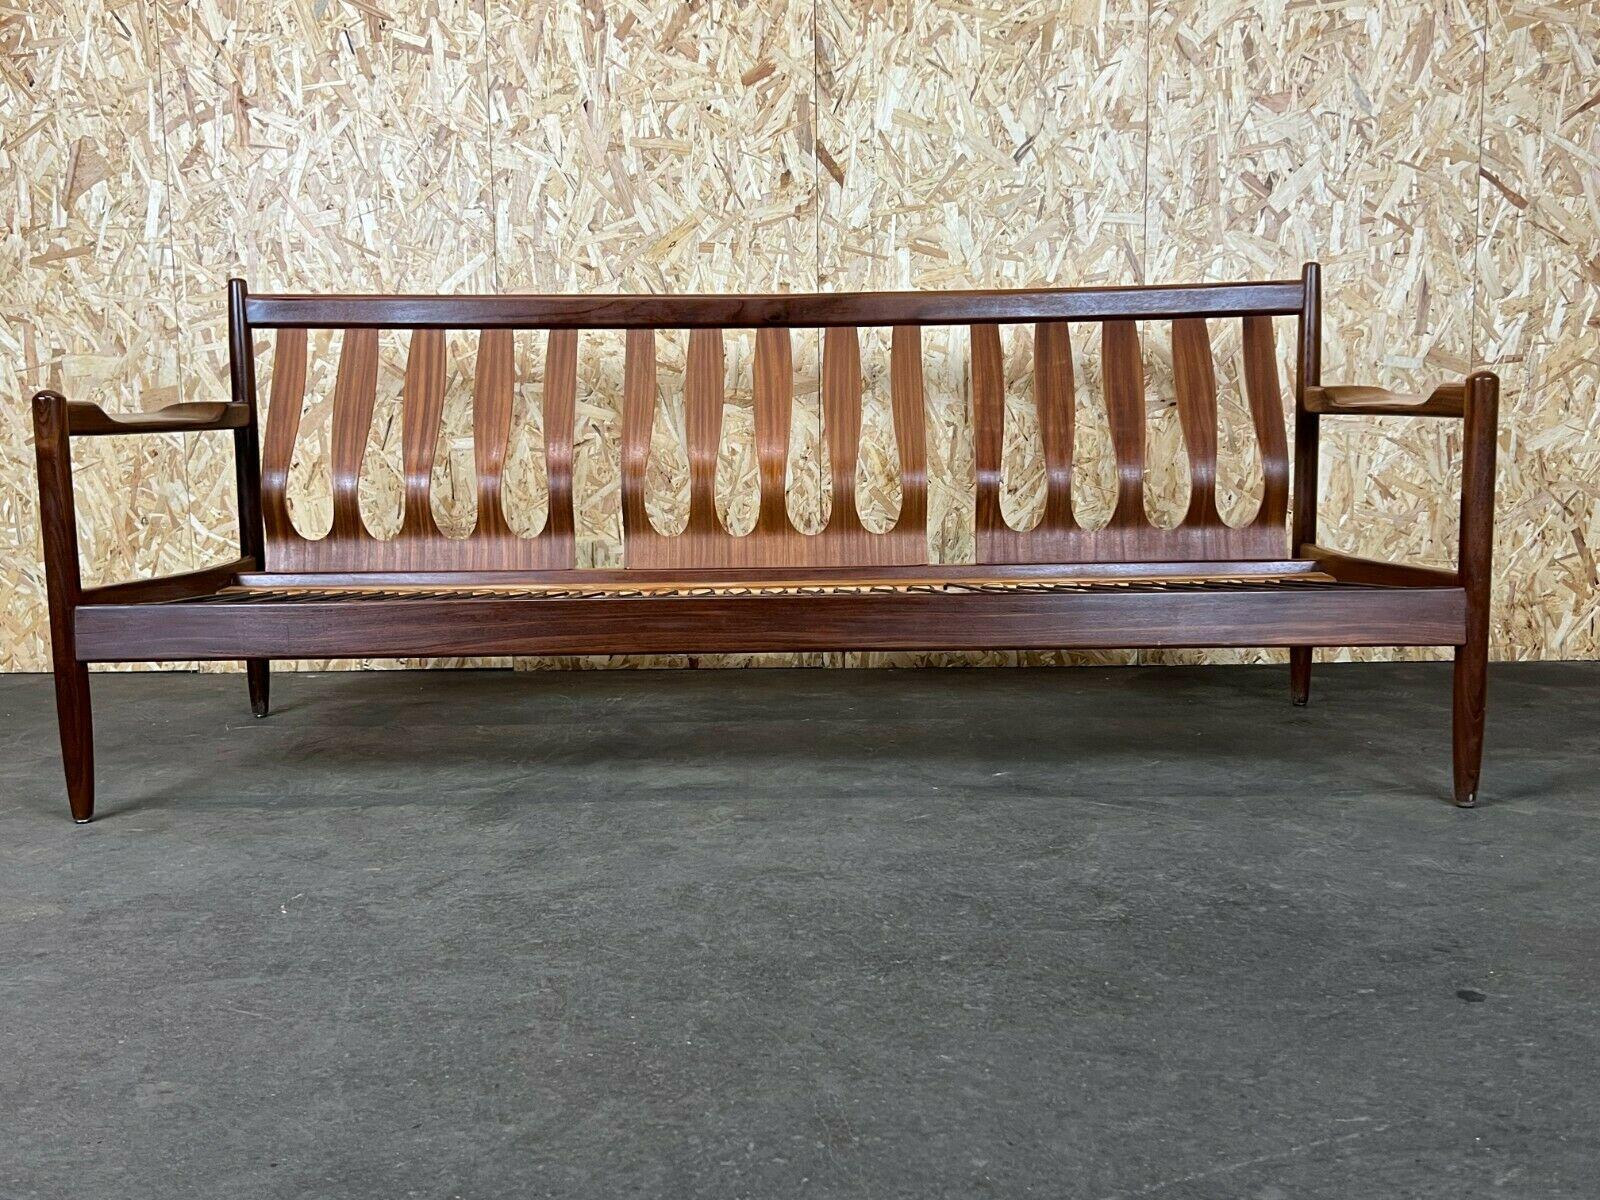 60s 70s Sofa 3-Seater Couch Seating Set Danish Modern Design Denmark For Sale 4